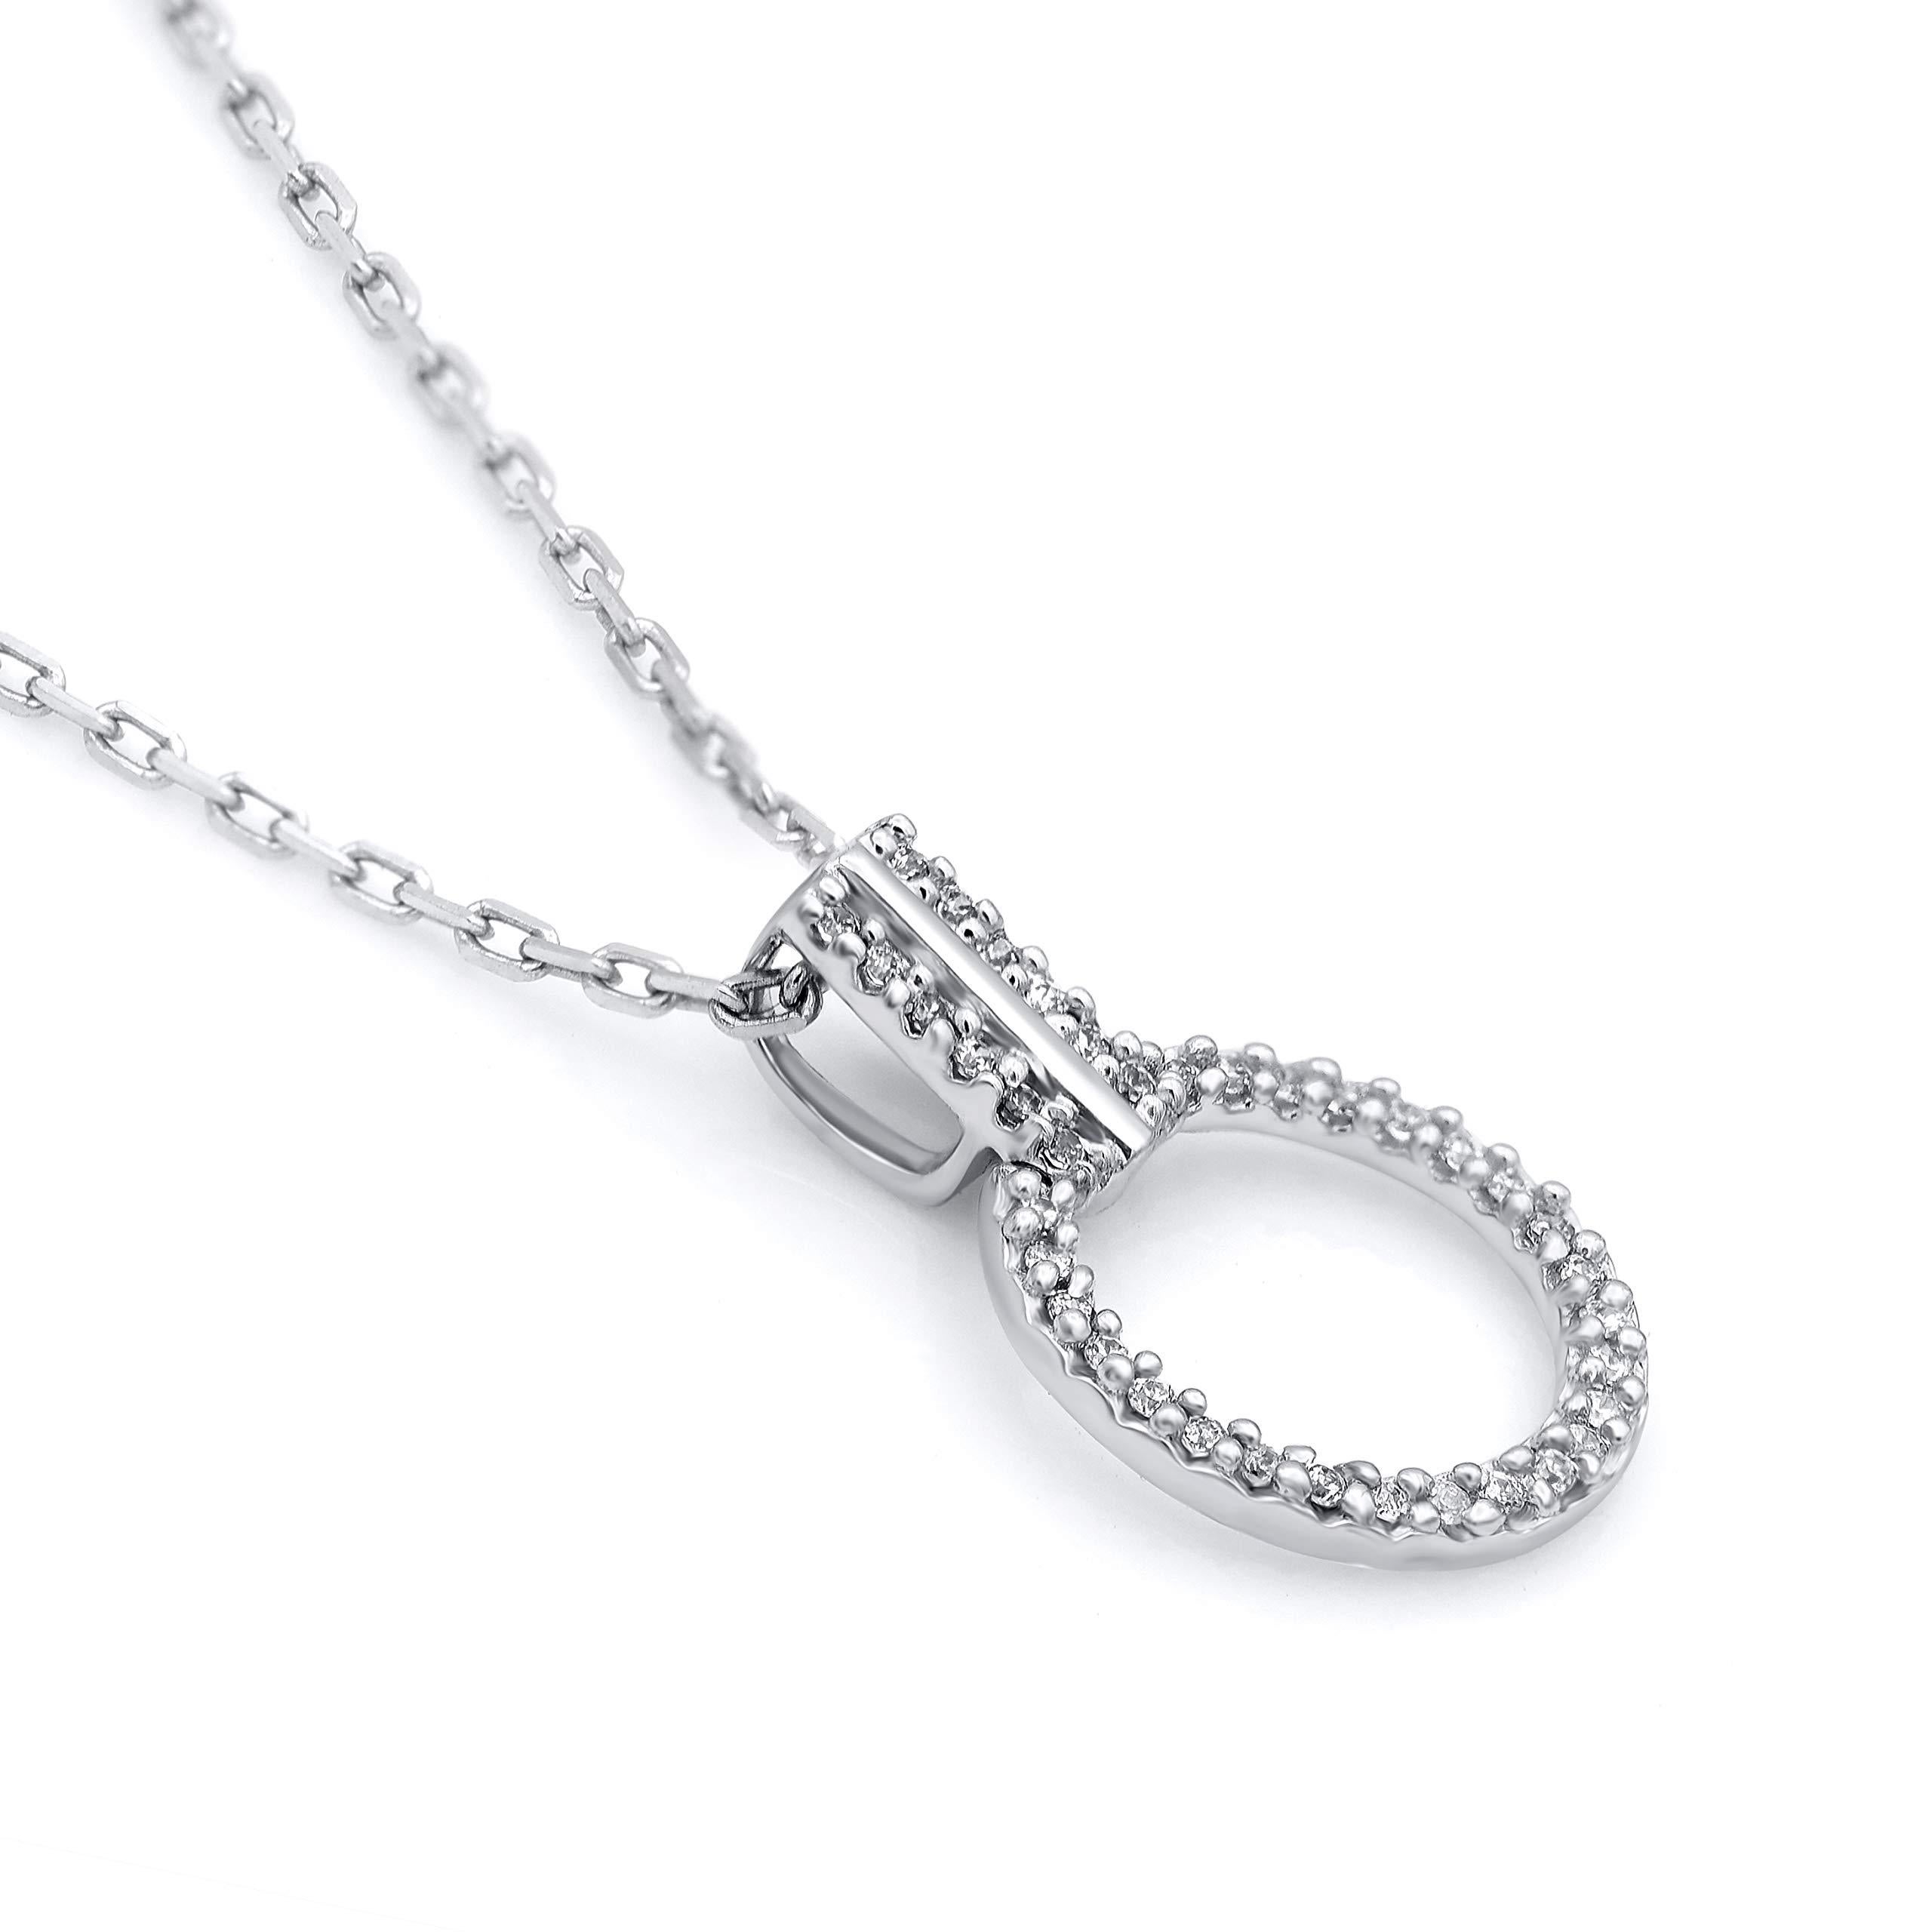 This diamond open circle eternity pendant fits any occasion with ease. These eternity pendants are studded with 37 single cut natural diamonds in prong setting and crafted in 14 karat white gold. Total diamond weight is 0.08 carat. Diamonds are